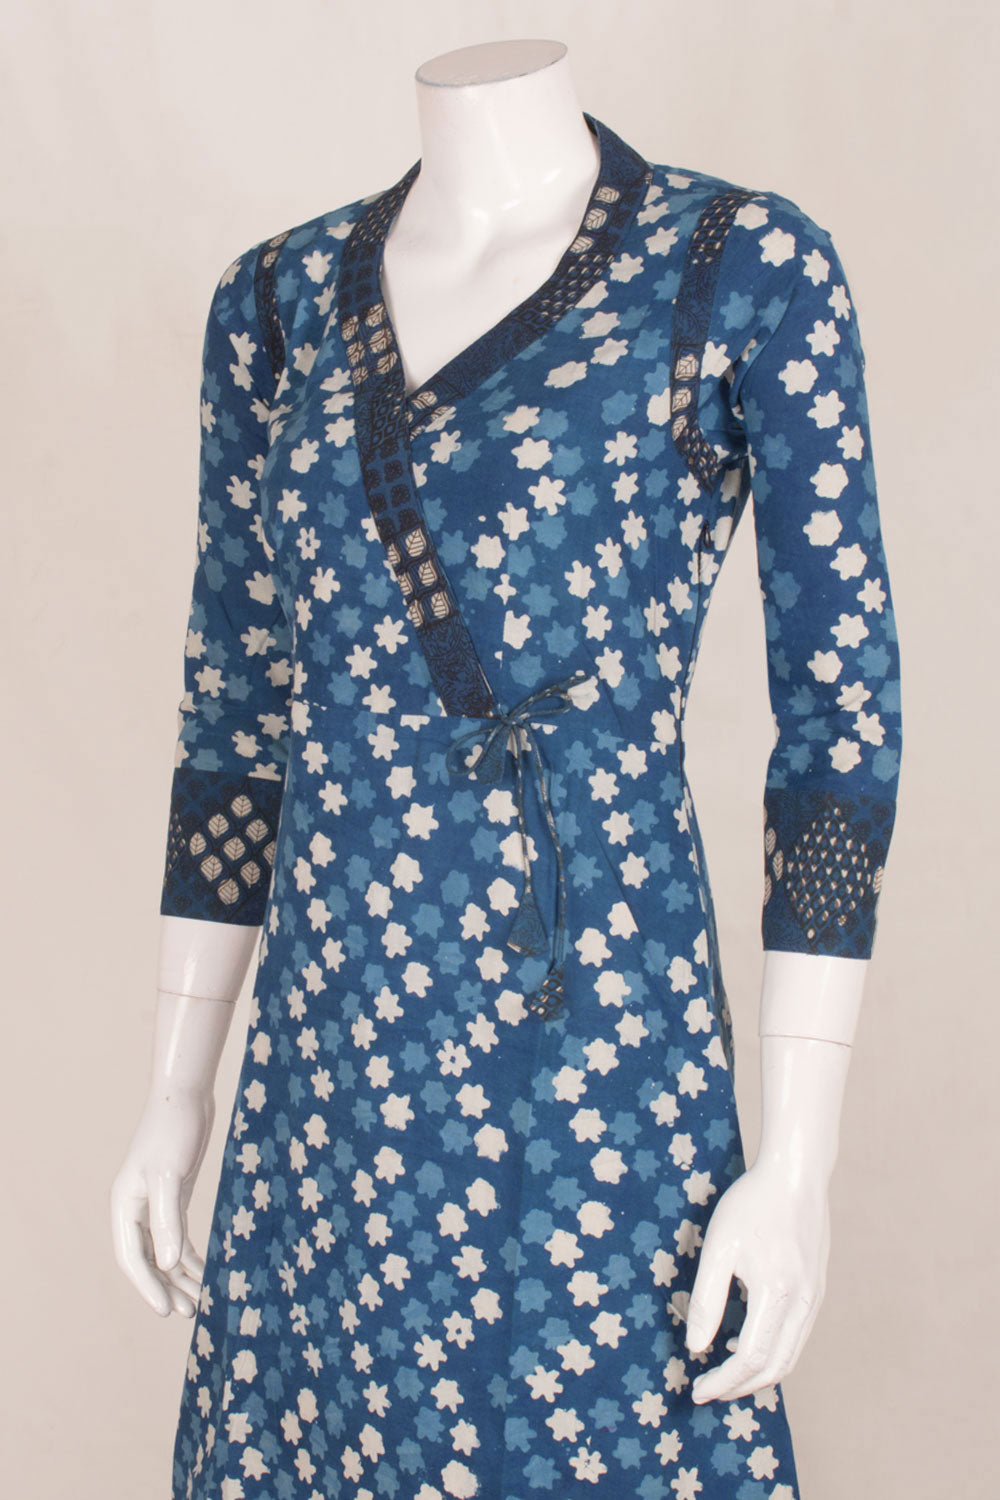 Dabu Printed Cotton Dress with Floral Motifs and Side Zip